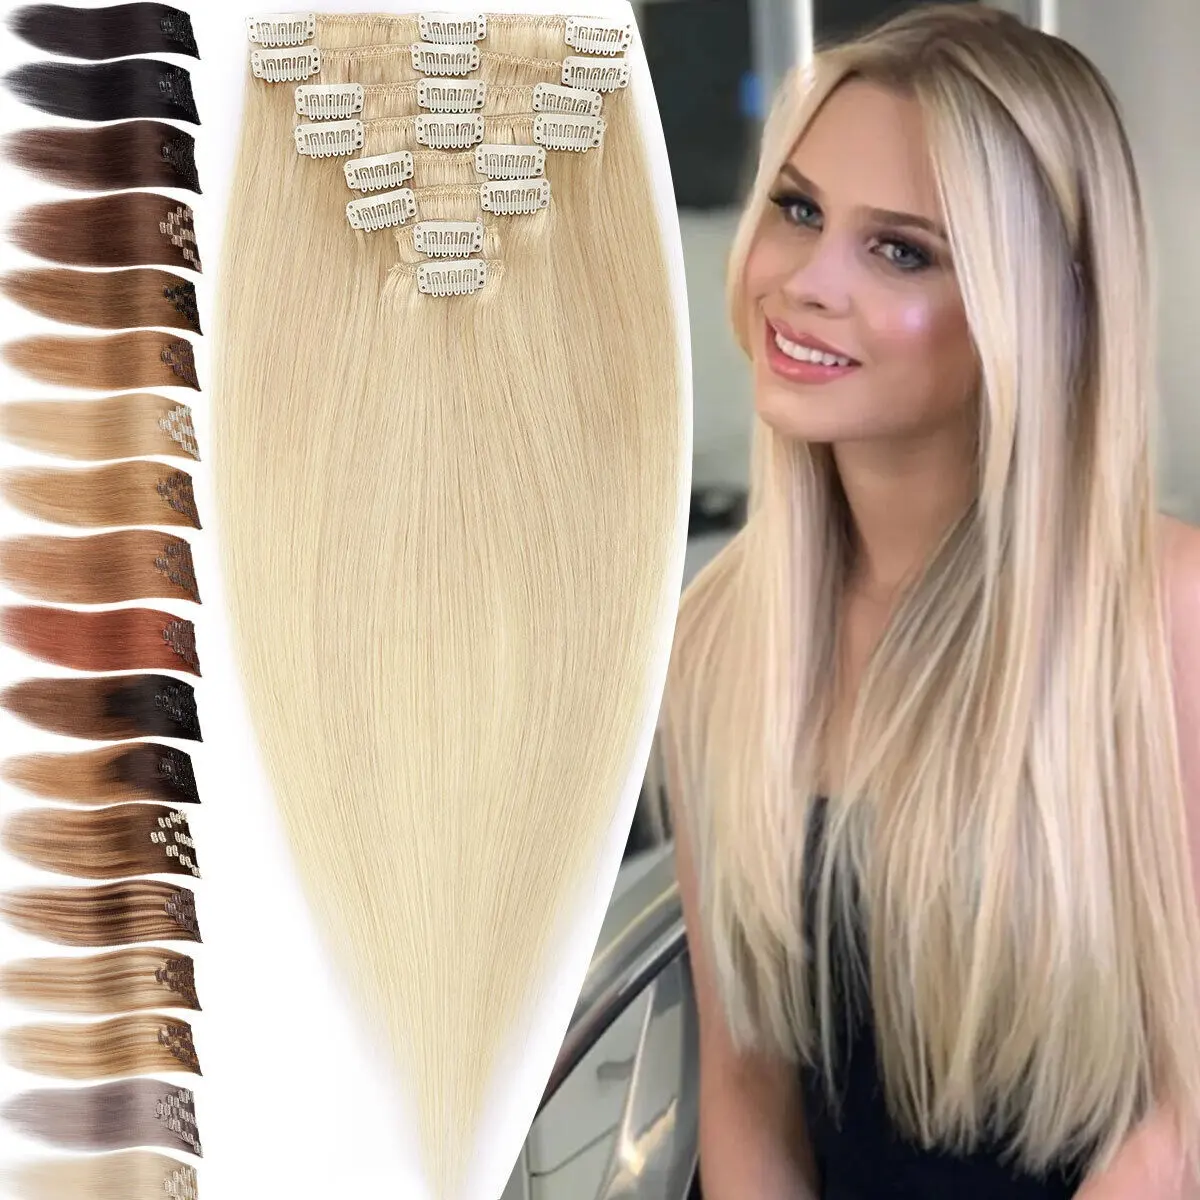 High quality remy hair 8pcs full head remy clip in human hair extension for white woman